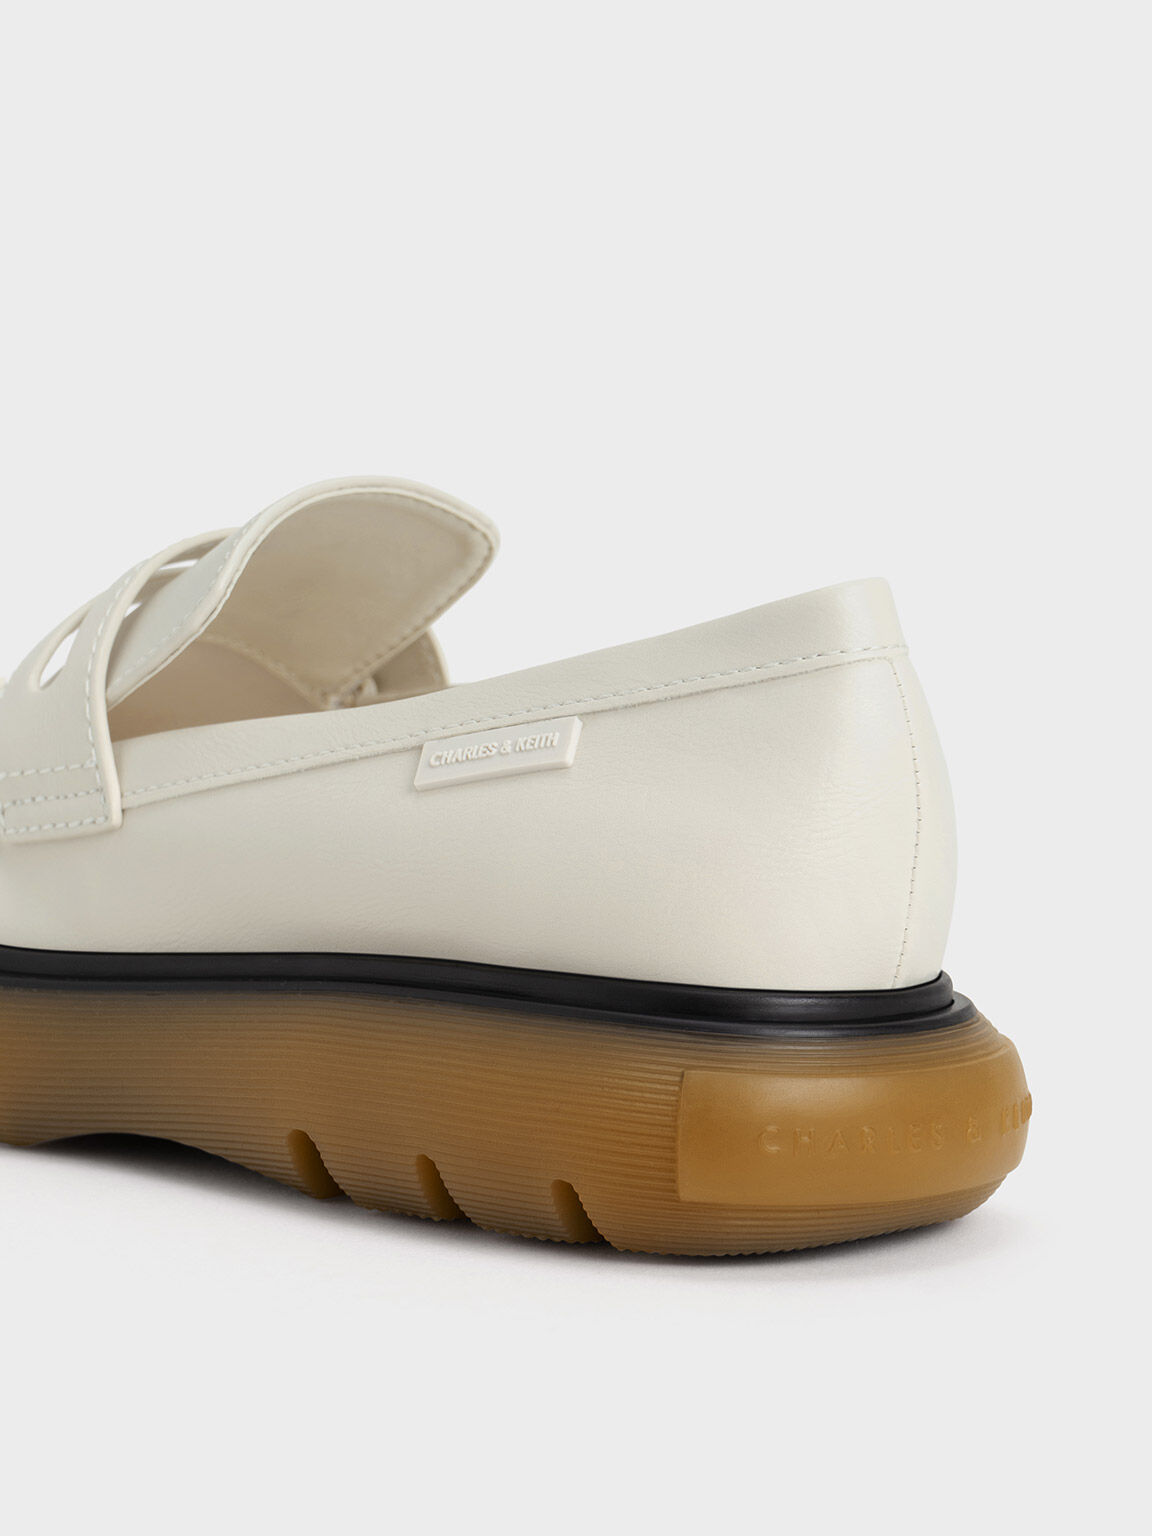 Women's Flat Loafers | Shop Exclusive Styles | CHARLES & KEITH US